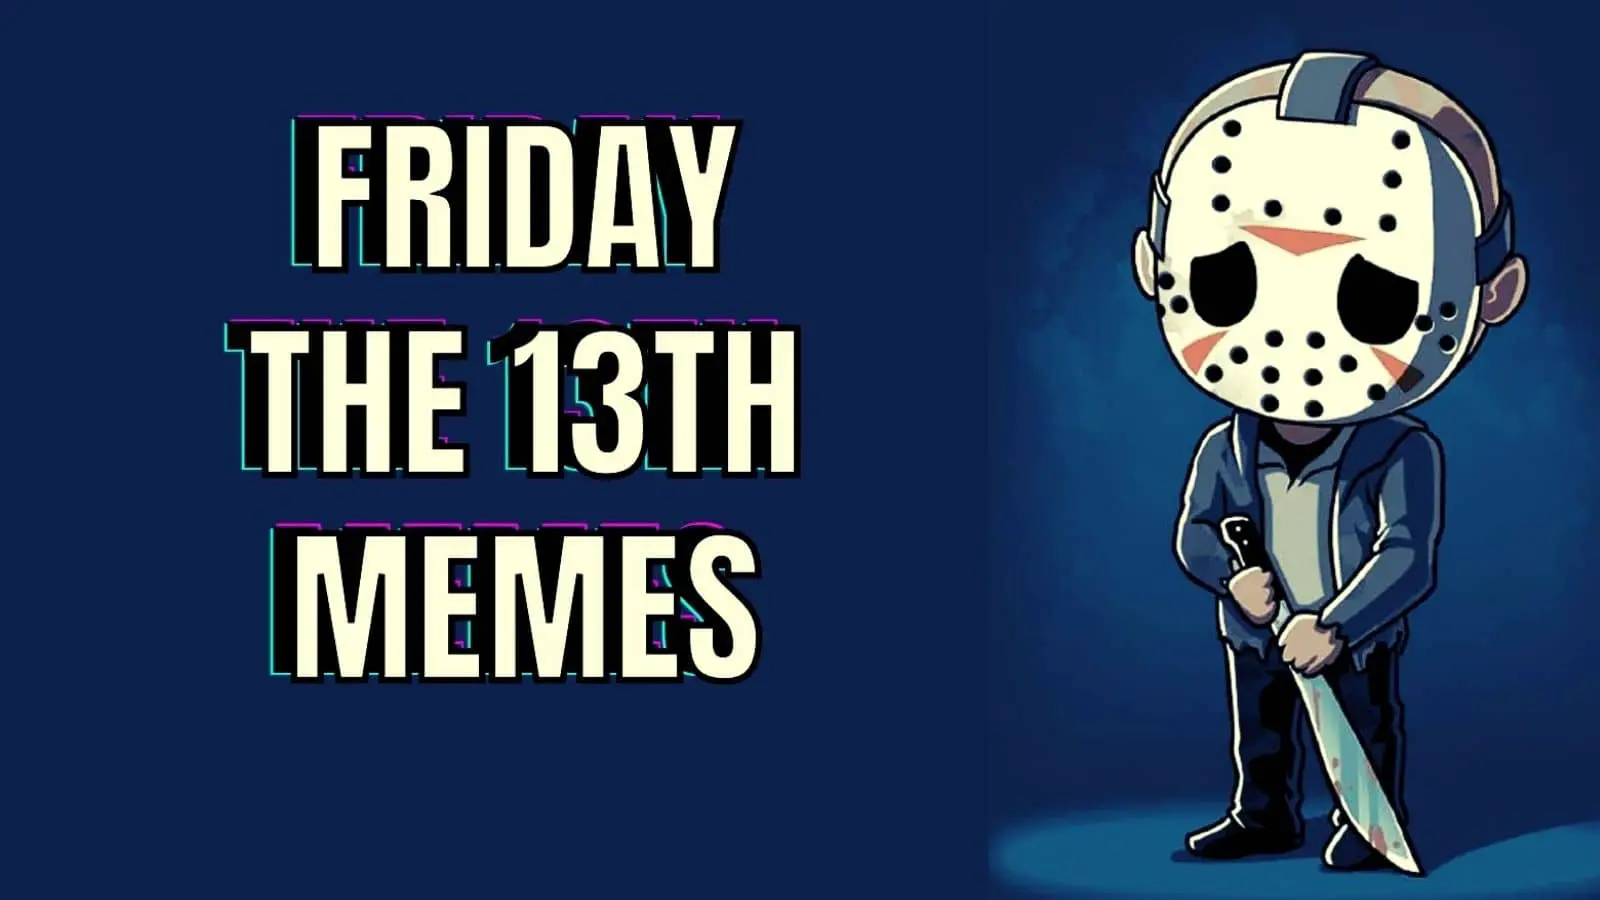 Funny Friday The 13th Memes